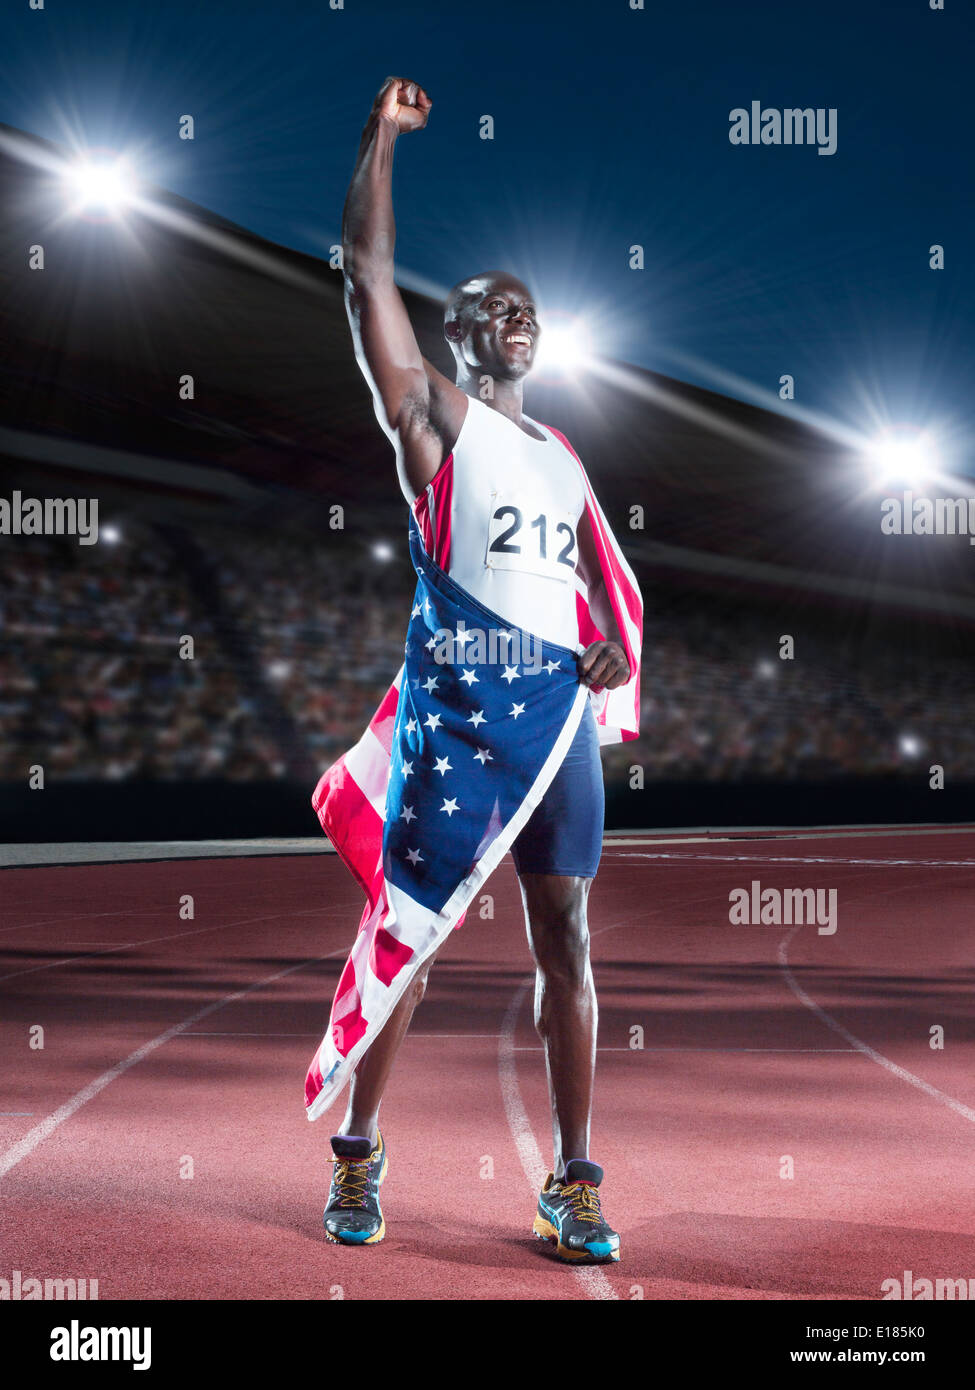 Track and field athlete wrapped in American flag on track Stock Photo